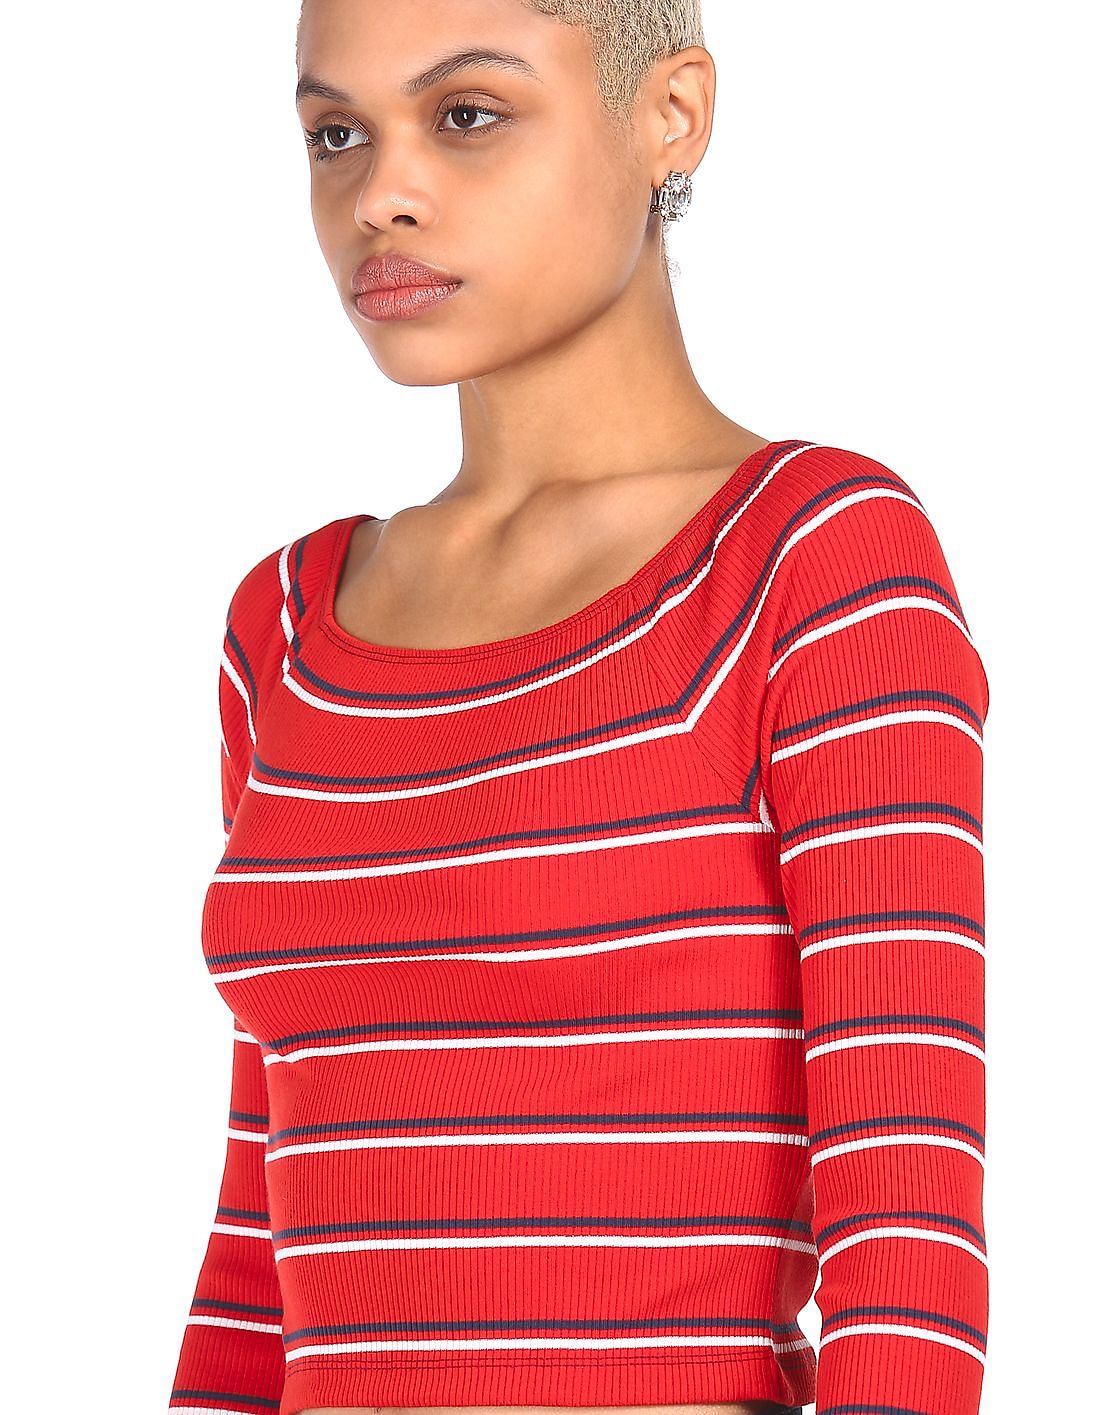 Red Buy Sleeve Tommy Hilfiger T-Shirt Long Striped Women